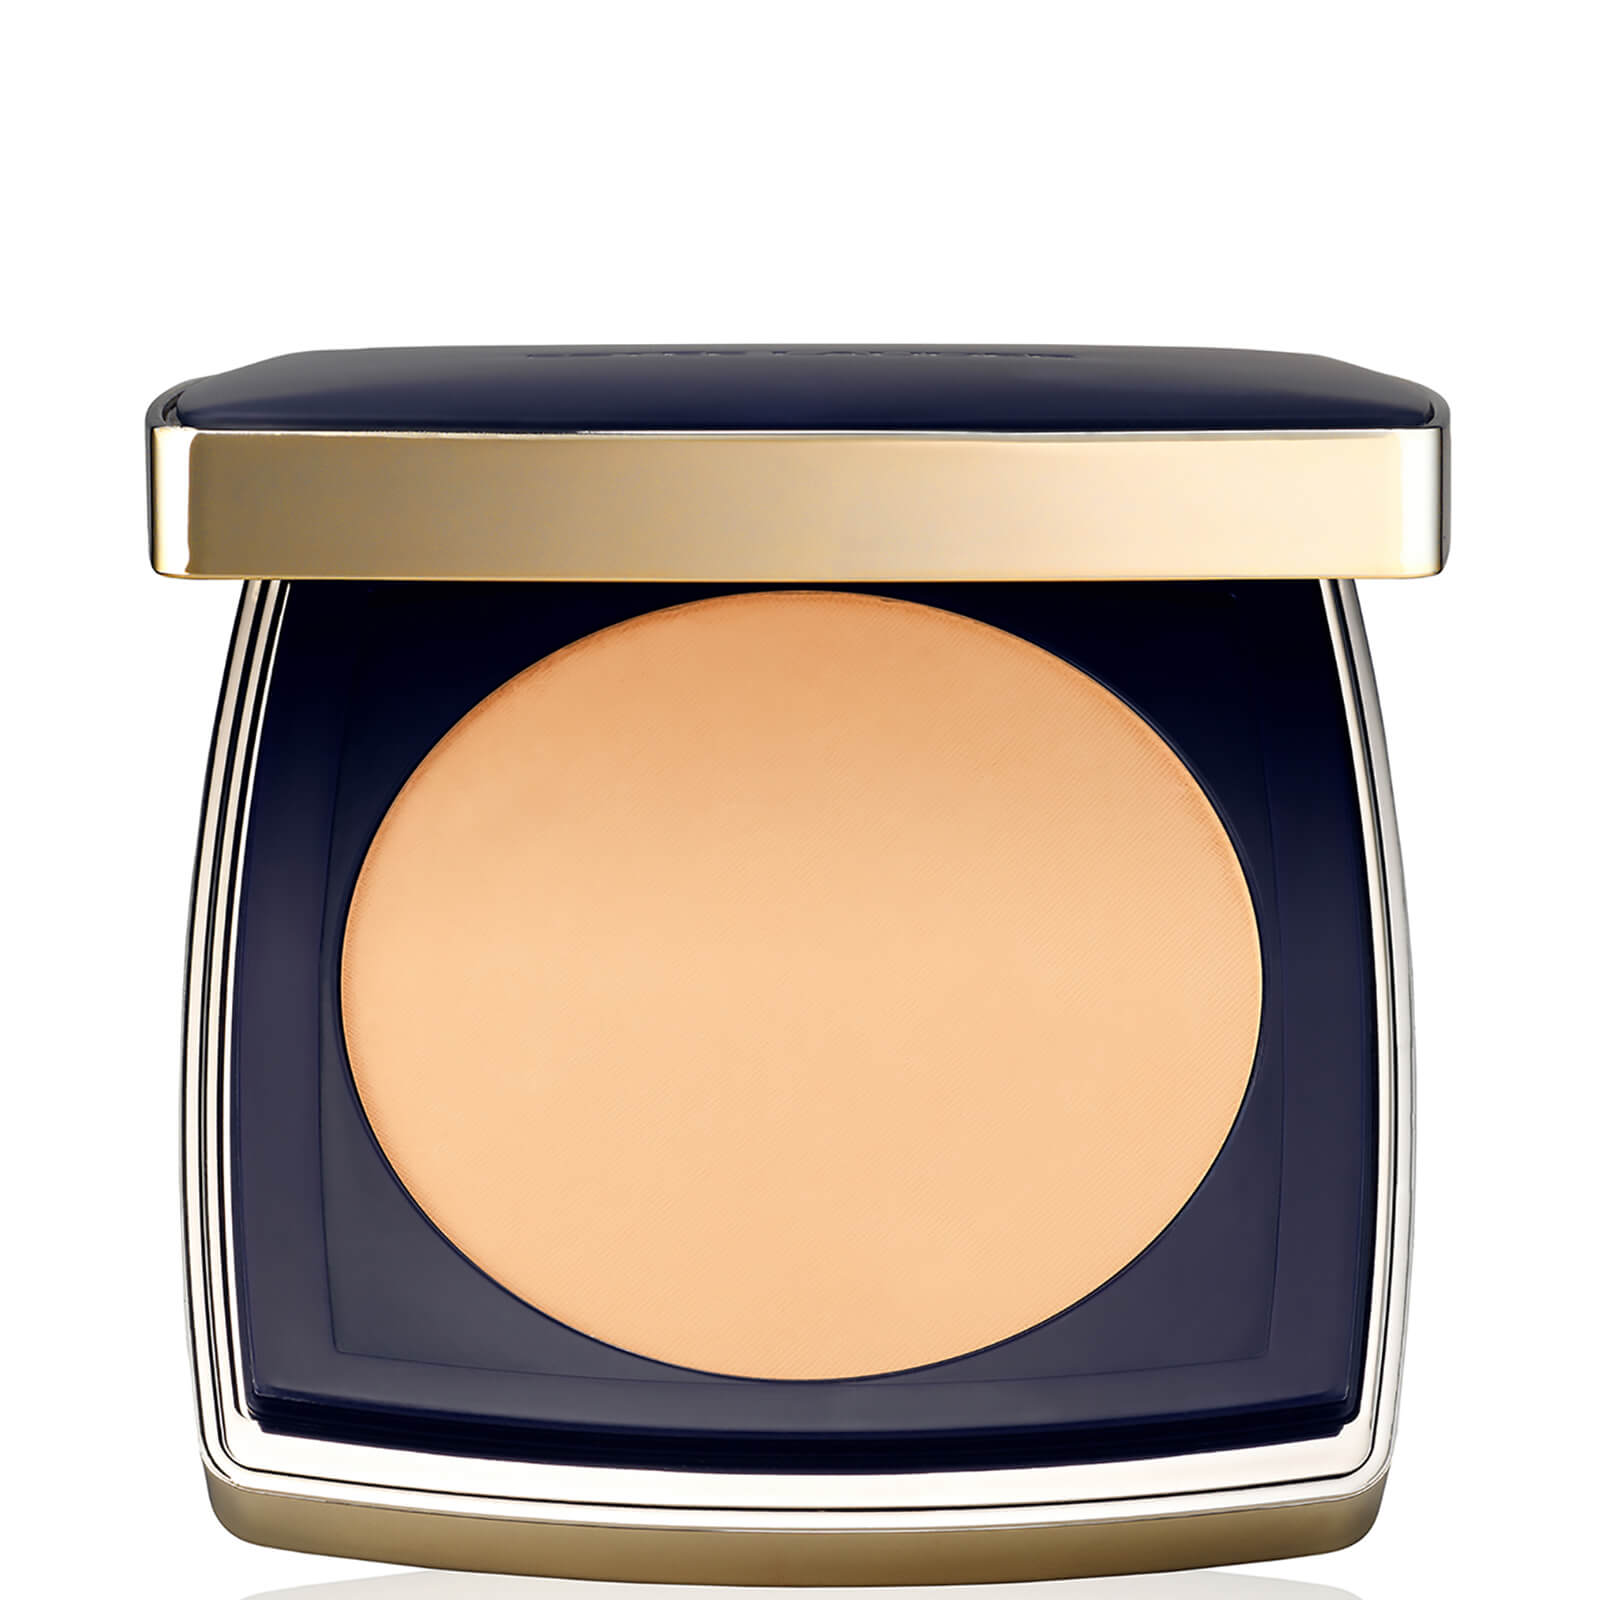 Estee Lauder Double Wear Stay-in-Place Matte Powder Foundation SPF10 12g (Various Shades) - 3N2 Whea